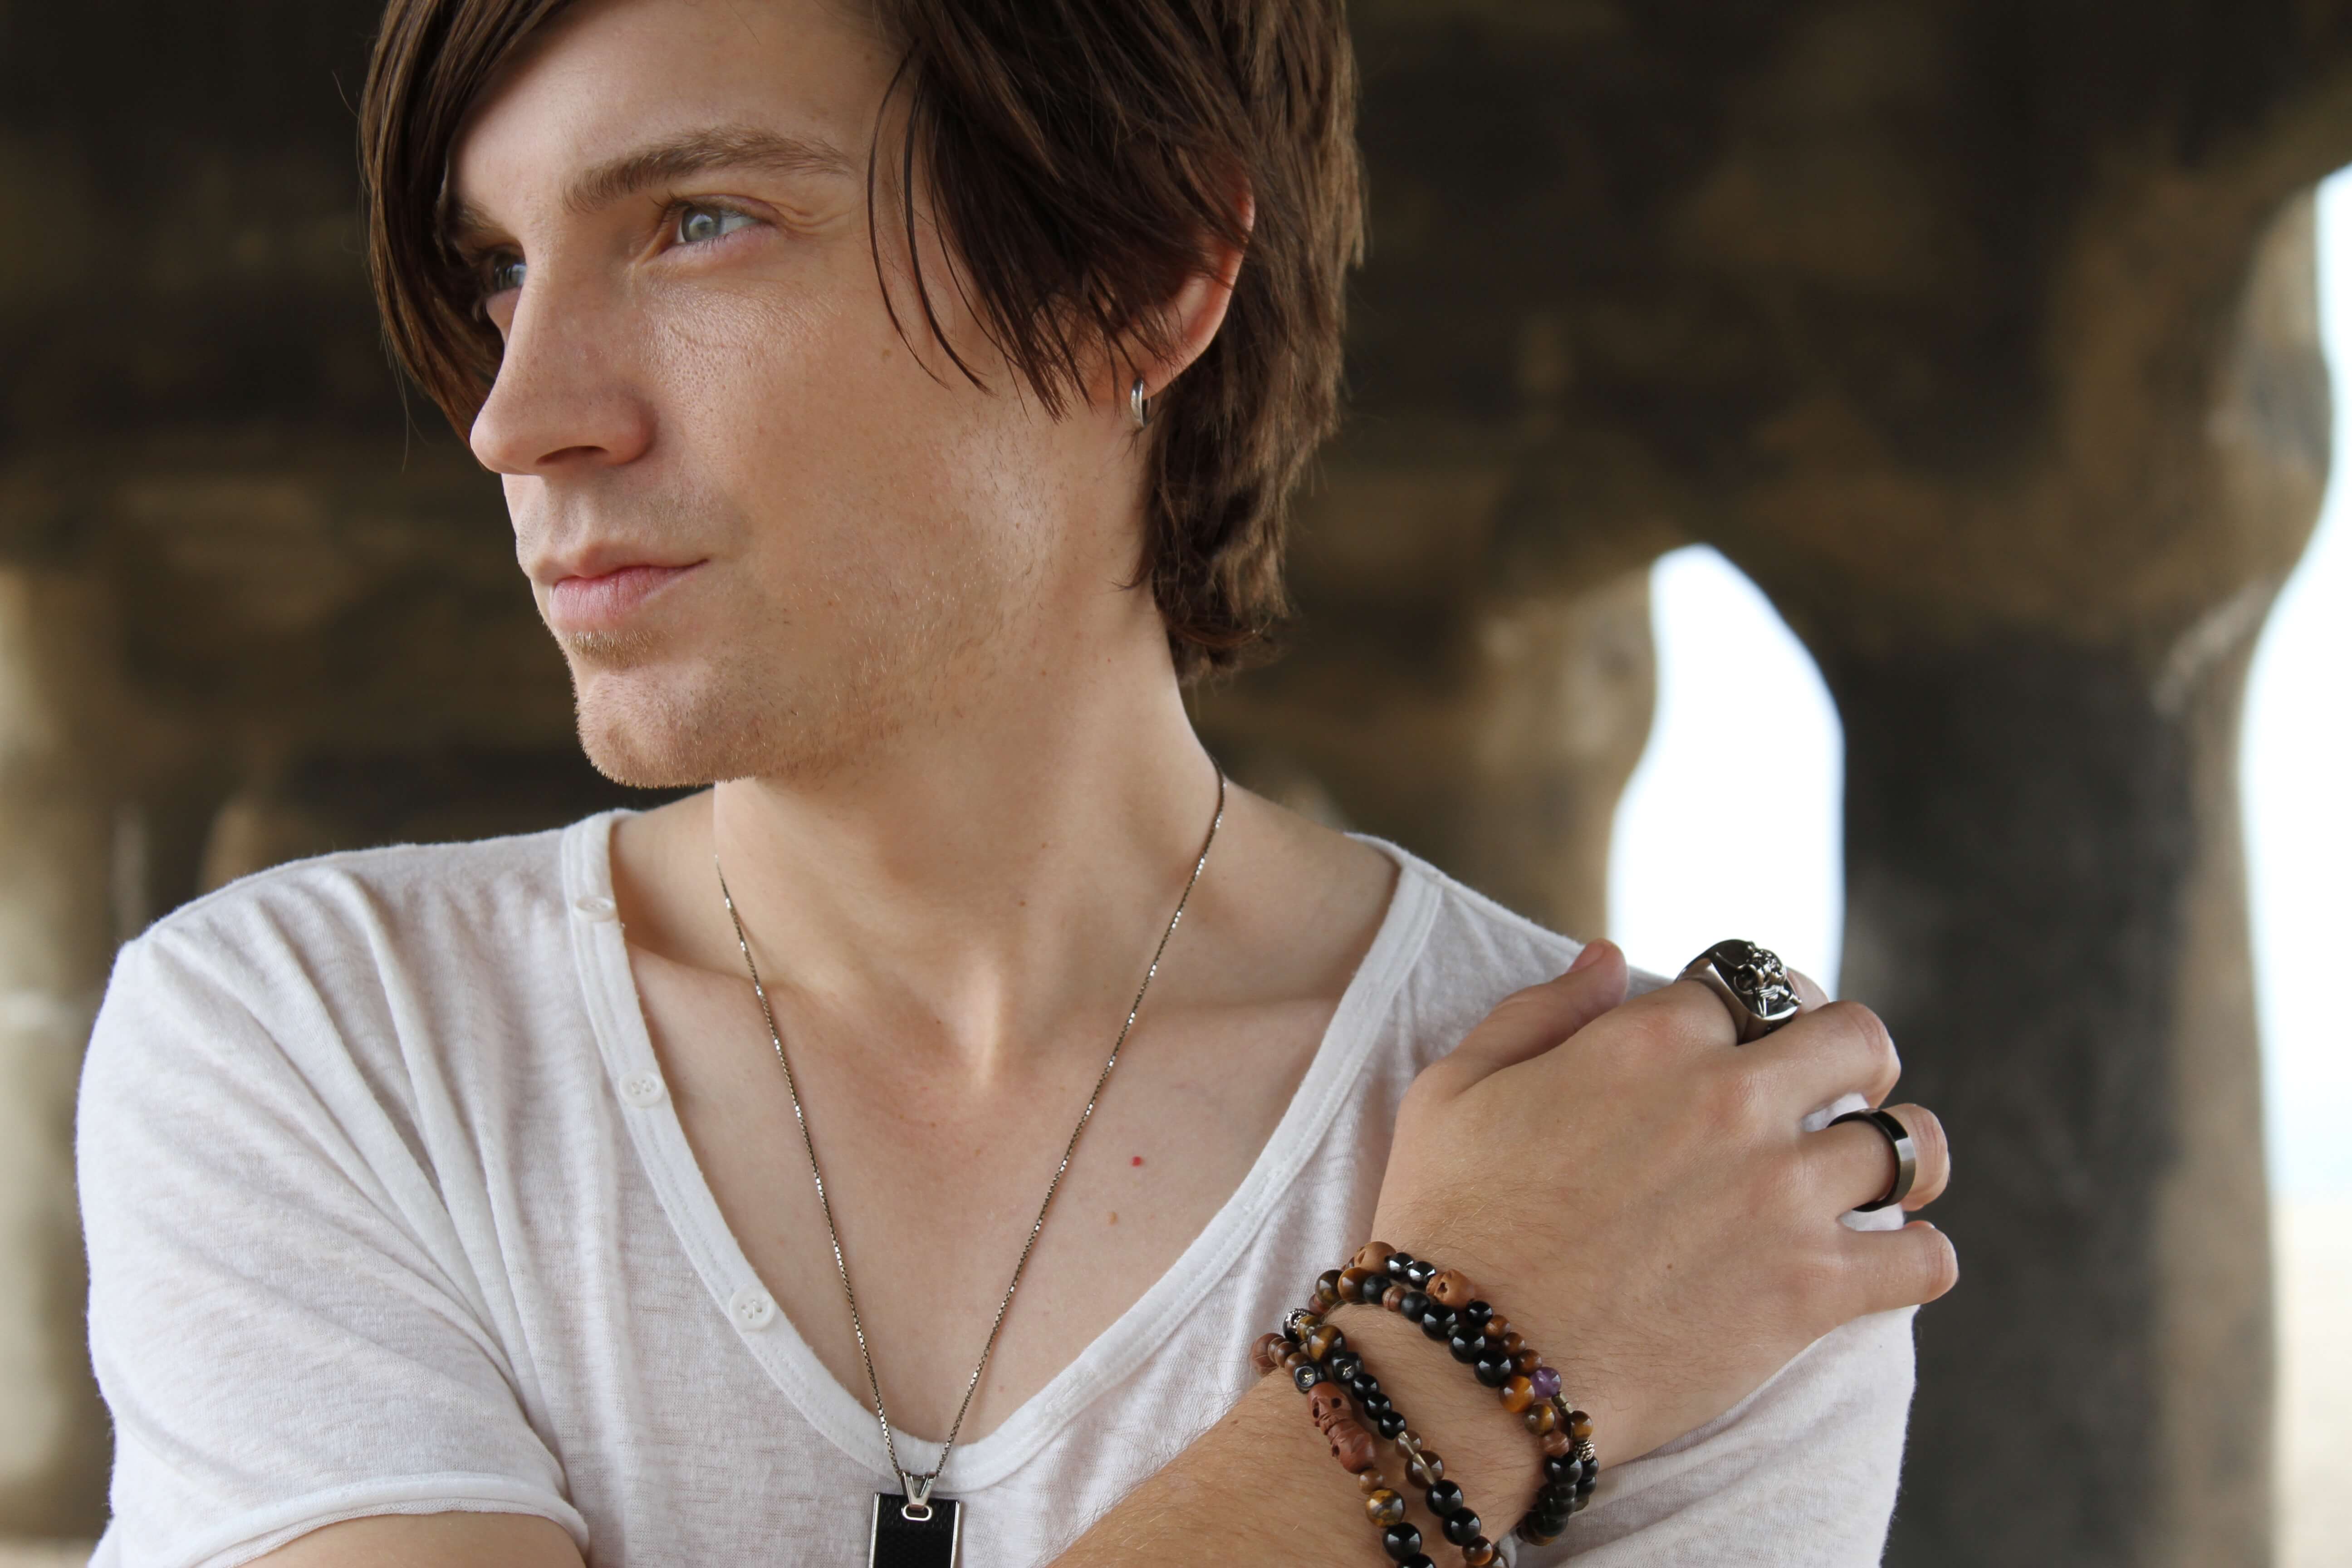 Alex Band, The Calling to Stage First Manila Concert on November 11